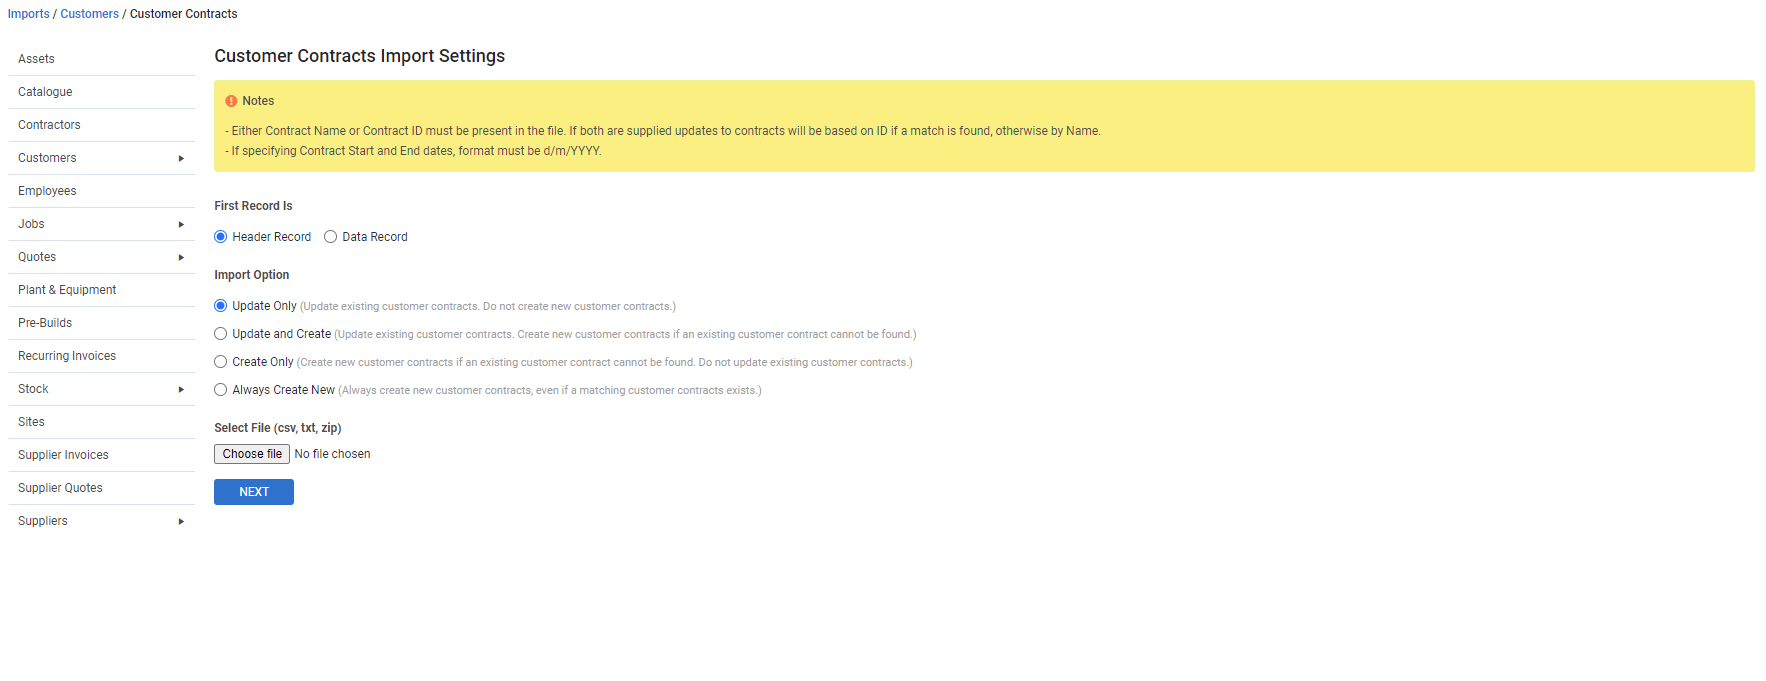 A screenshot of the Customer Contracts Import Settings page.